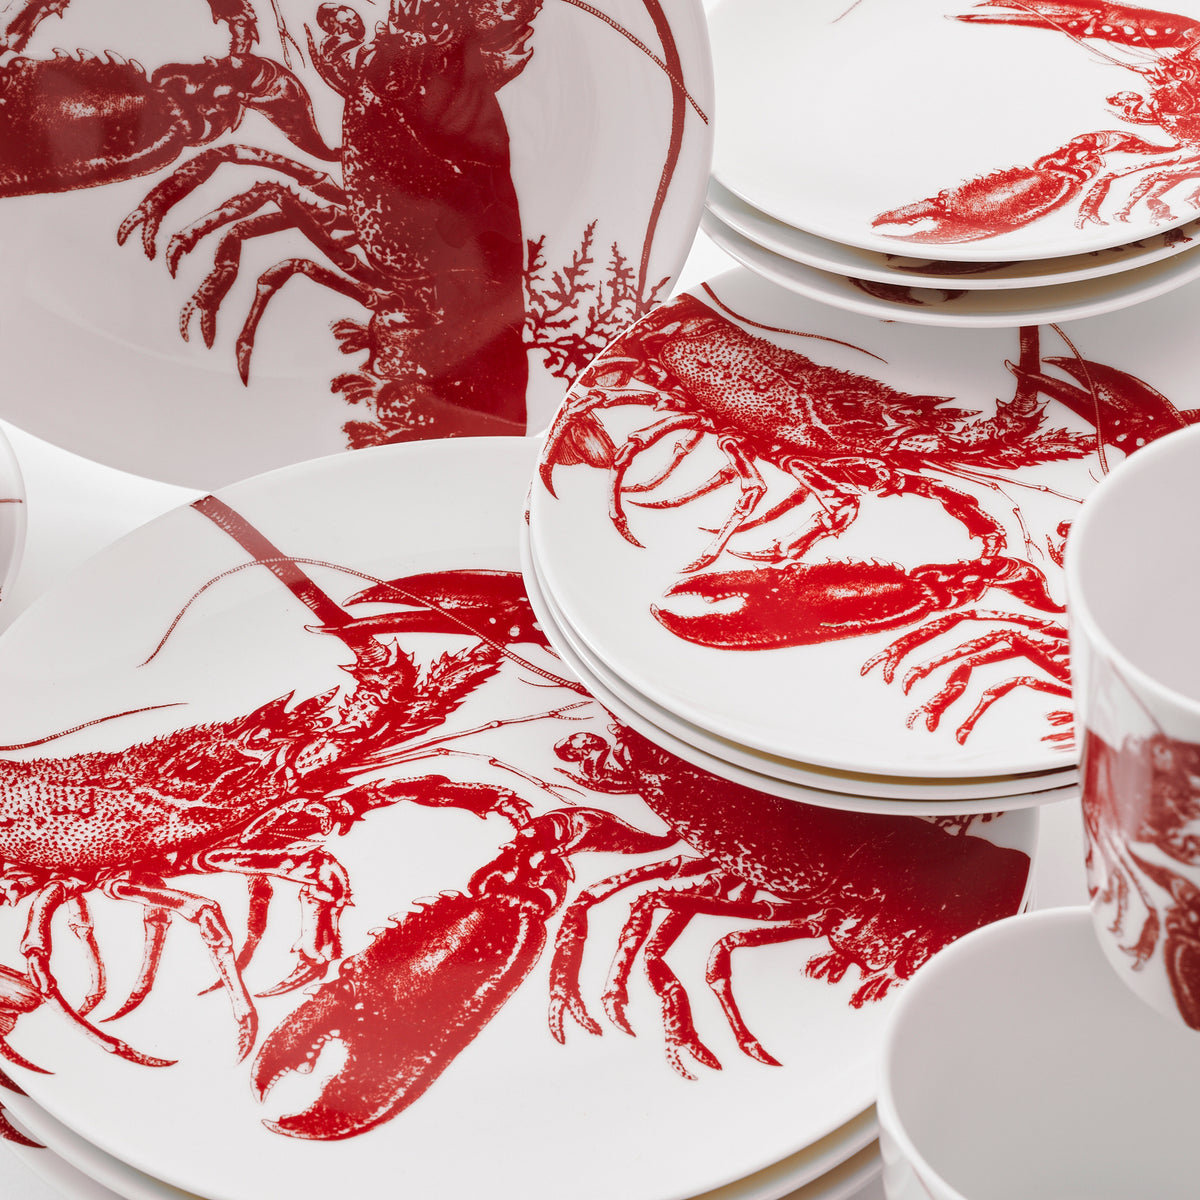 A set of Red Lobster Canapé Plates with lobsters on them, perfect for seaside dining or New England clambakes by Caskata Artisanal Home.